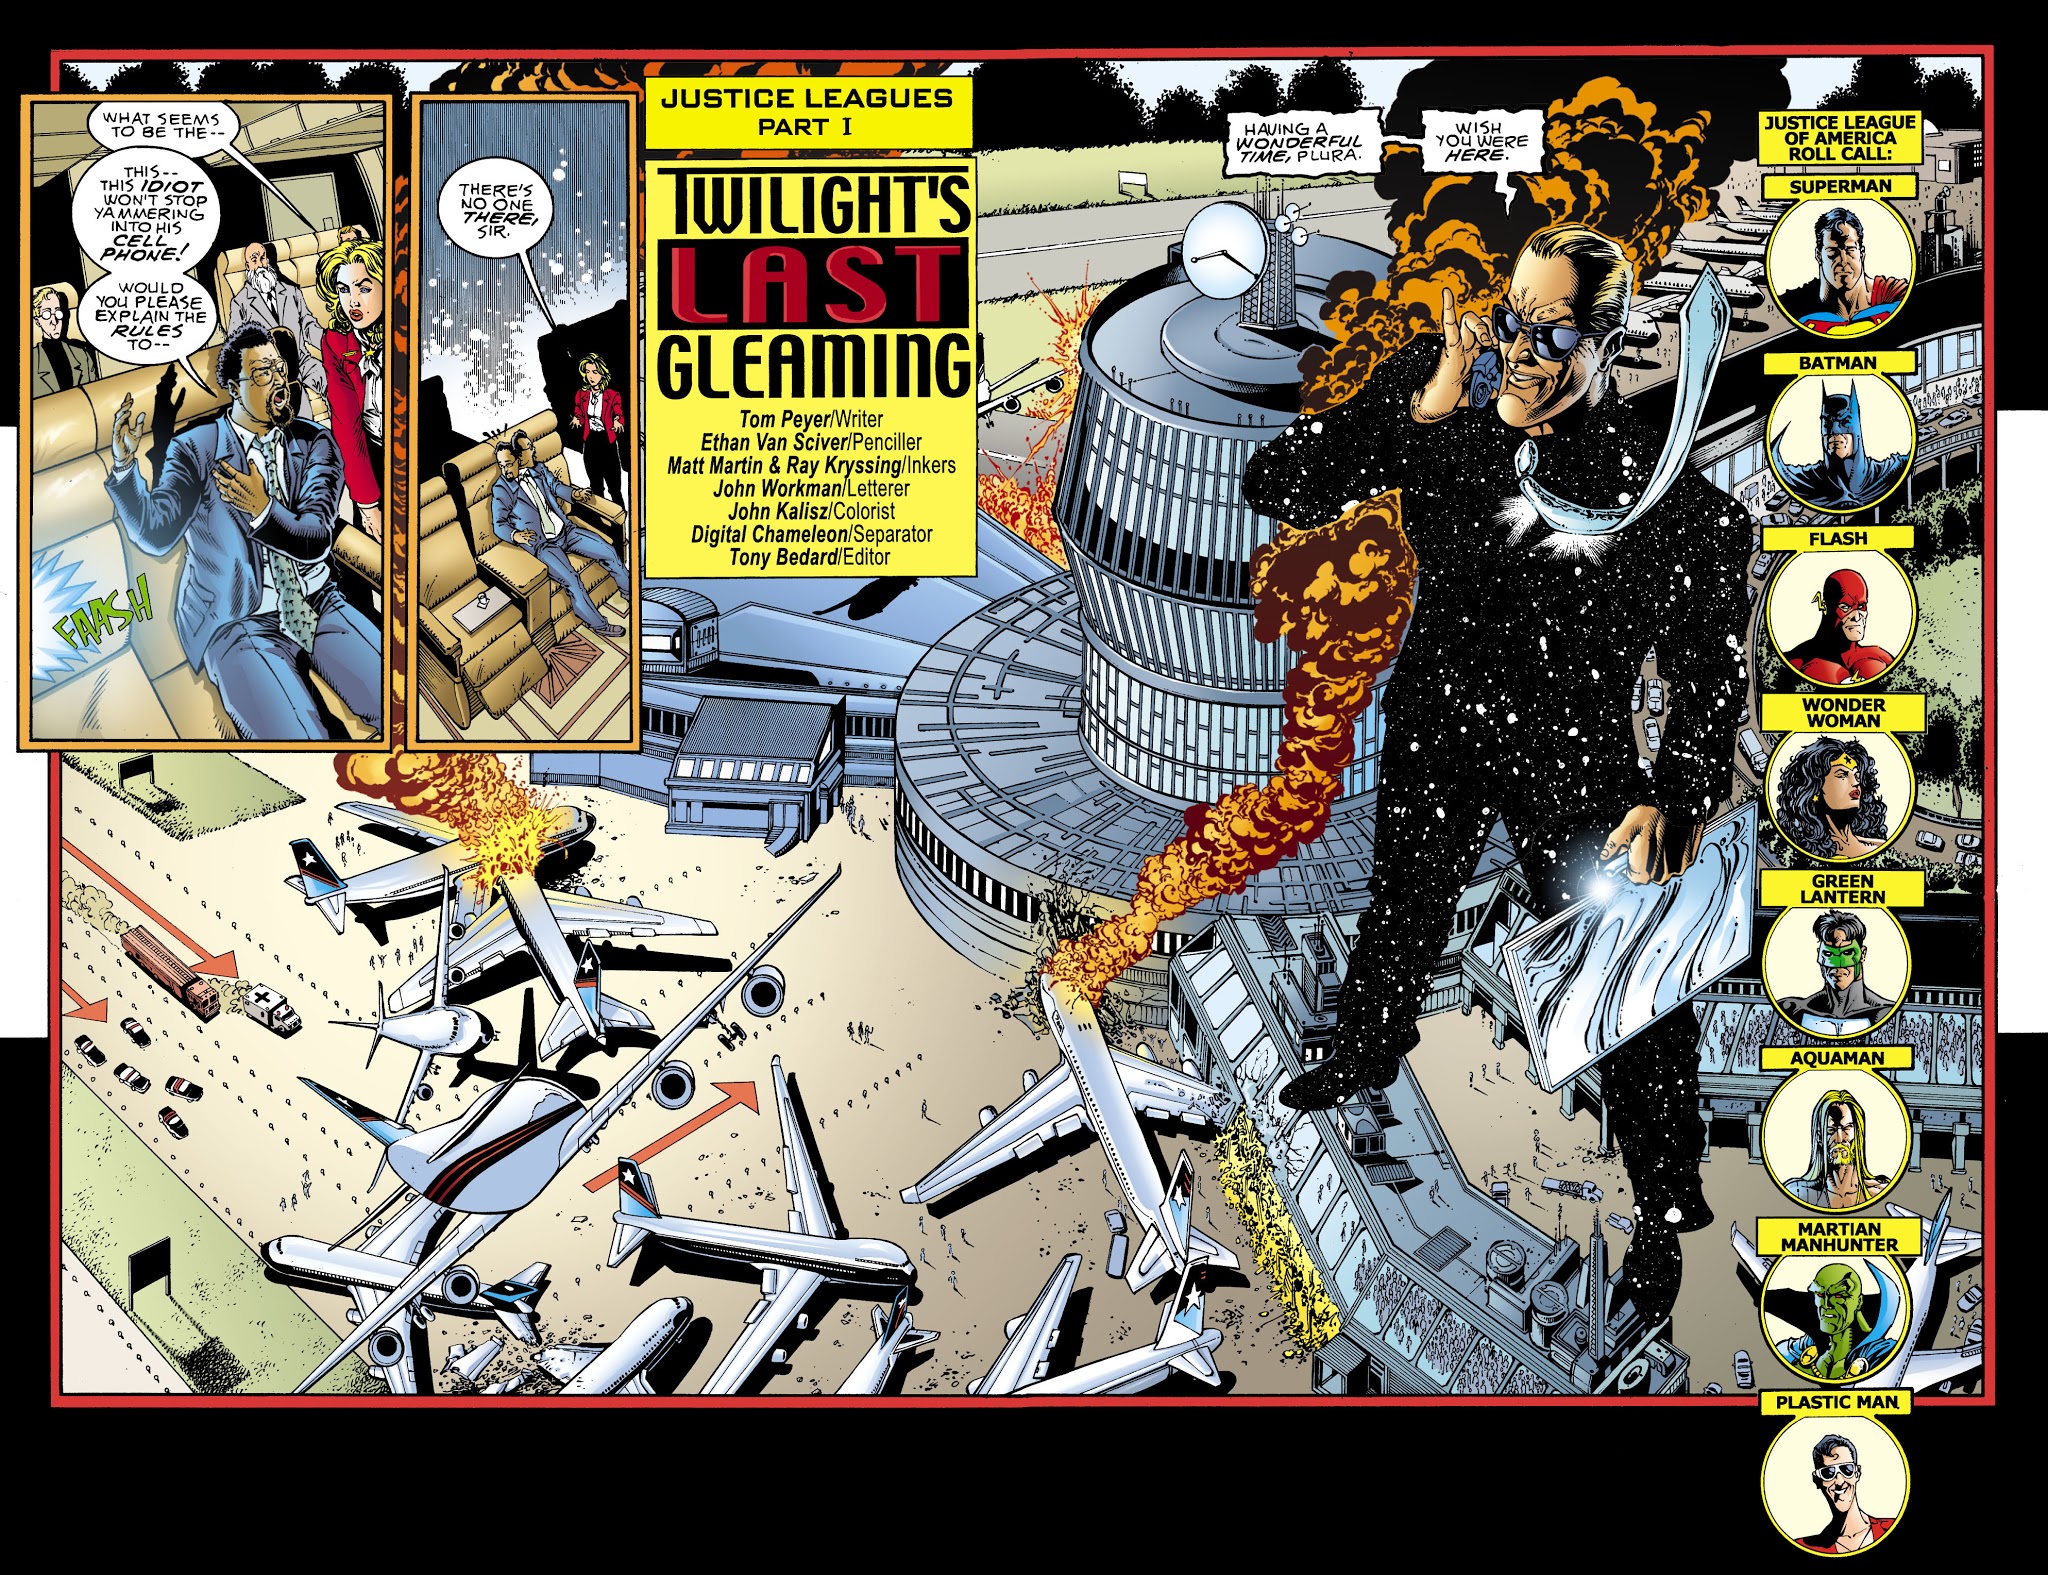 Read online Justice Leagues: JL? comic -  Issue # Full - 3